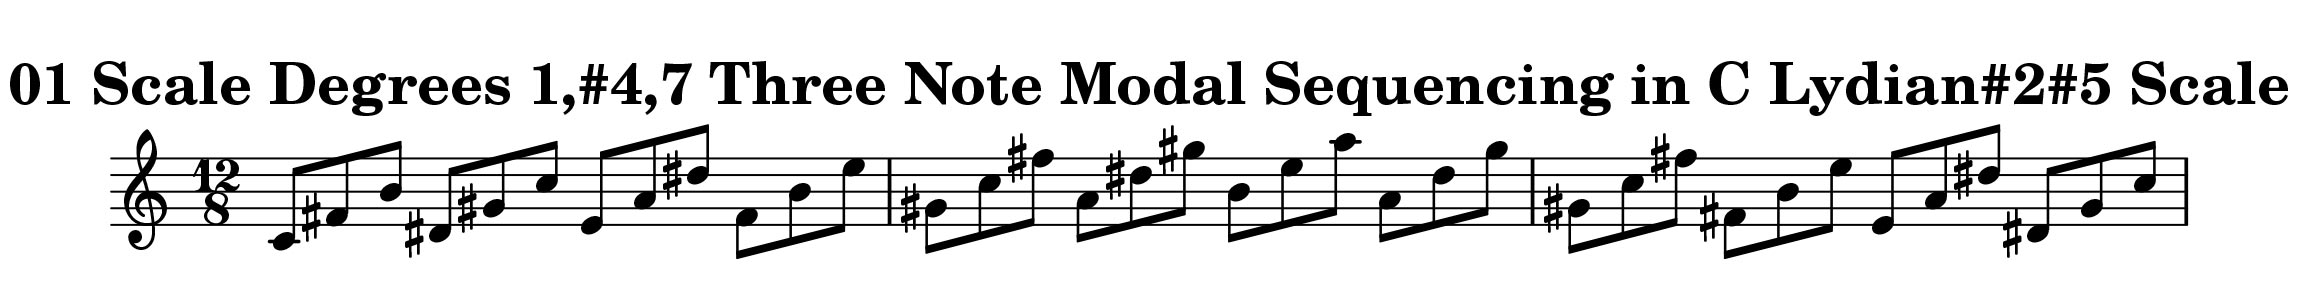 C Lydian#2#5 Scale Modal Sequencing 3 Note Group 4 for all instrumentalist by Bruce Arnold for Muse Eek Publishing Company